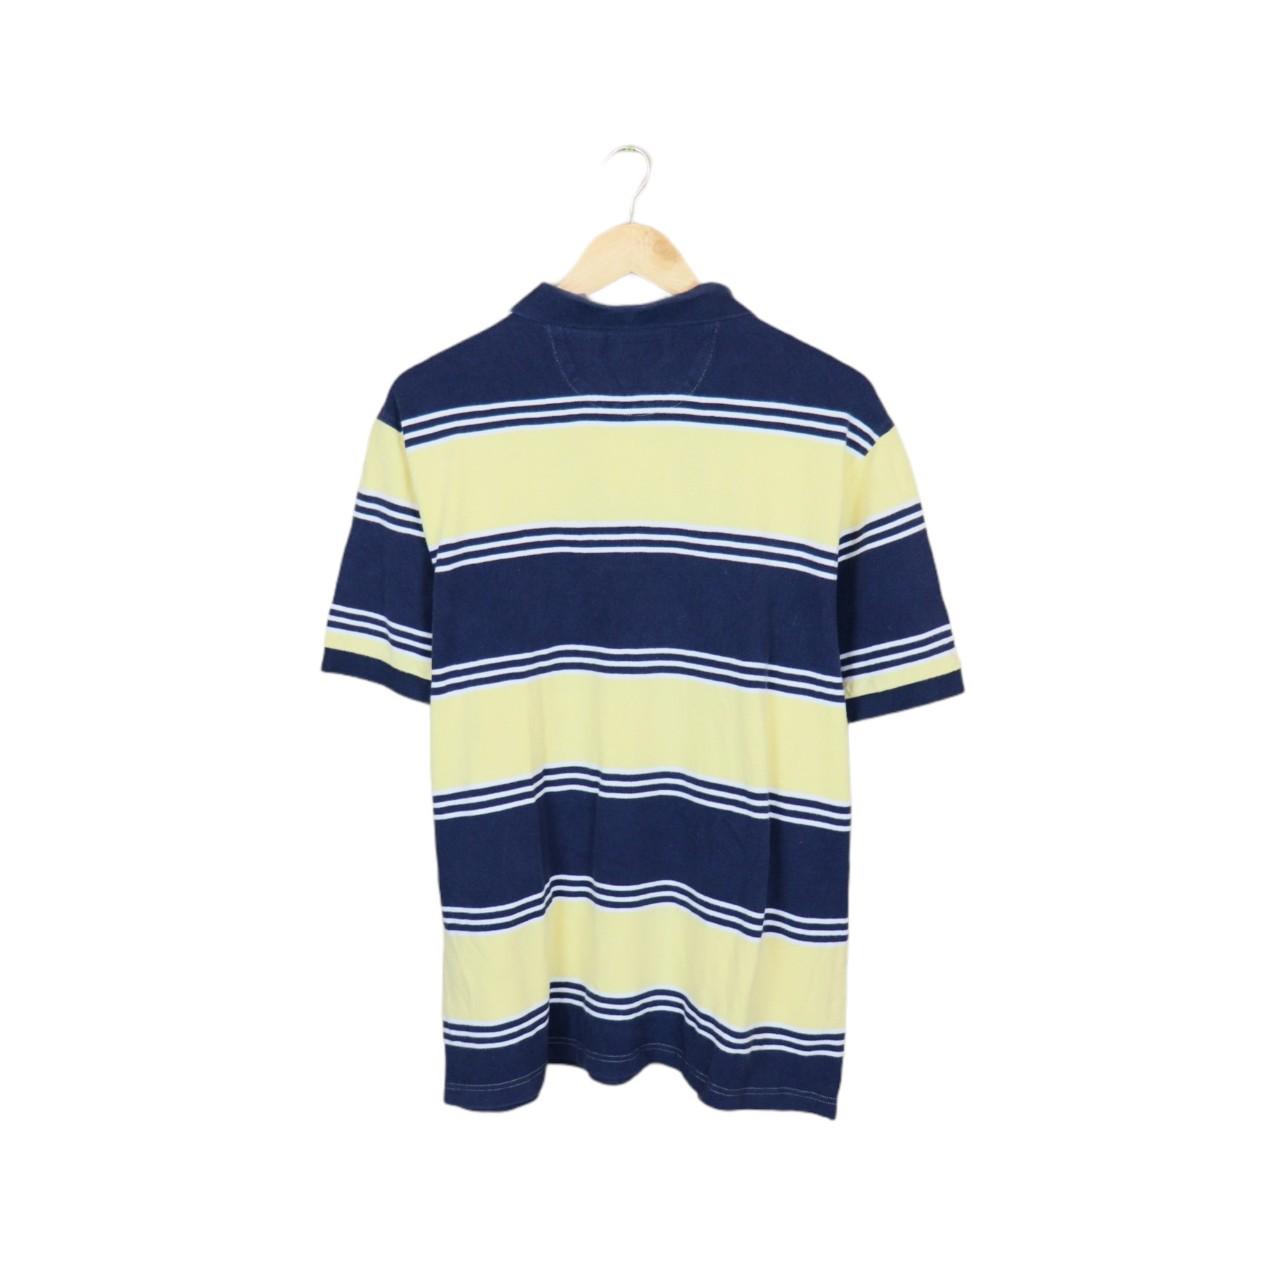 STRIPED NAVY/YELLOW CHAPS POLO TOP -... - Depop